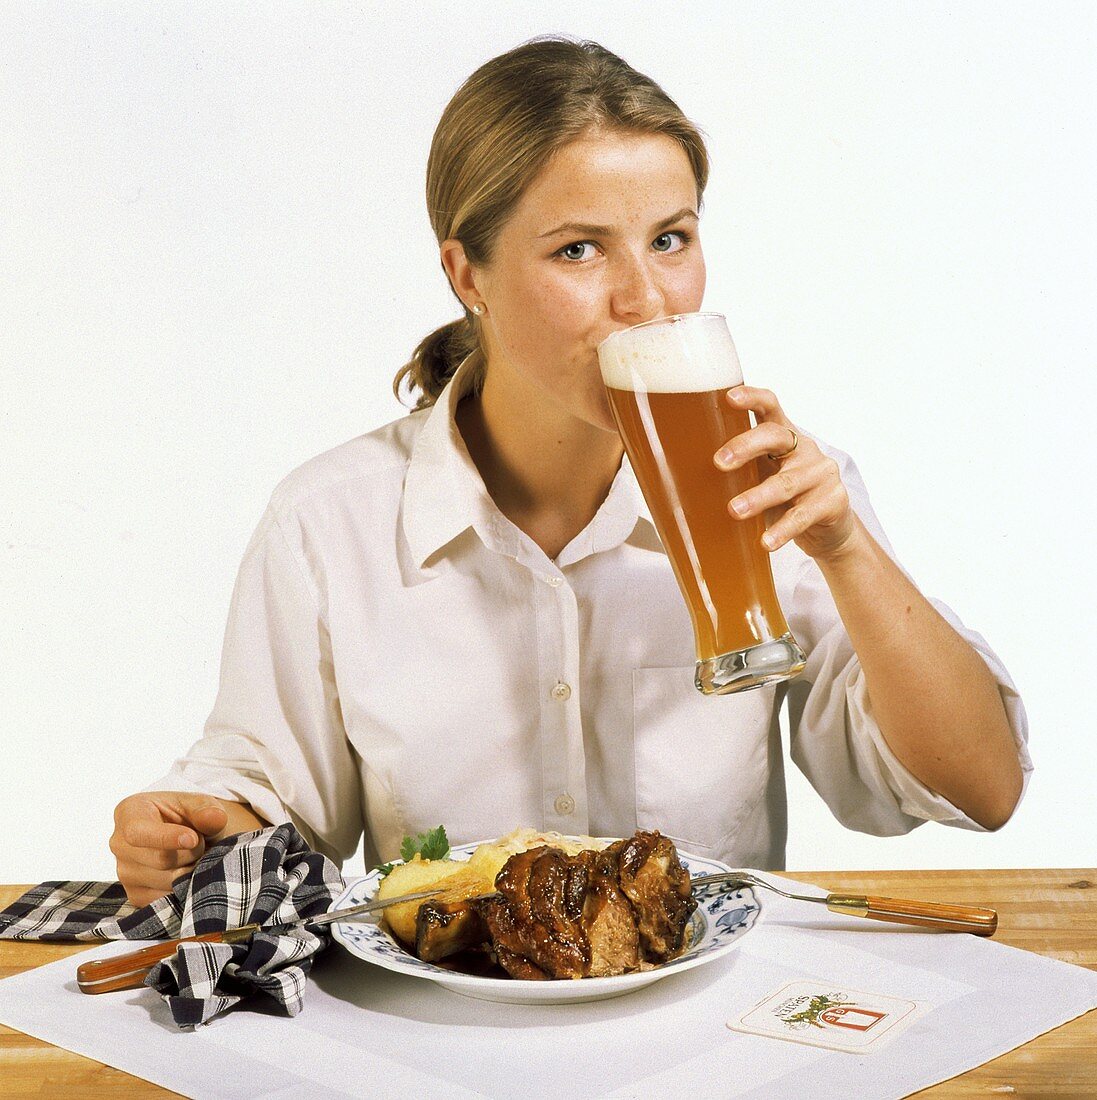 Woman Drinking Wheat Beer with Dinner